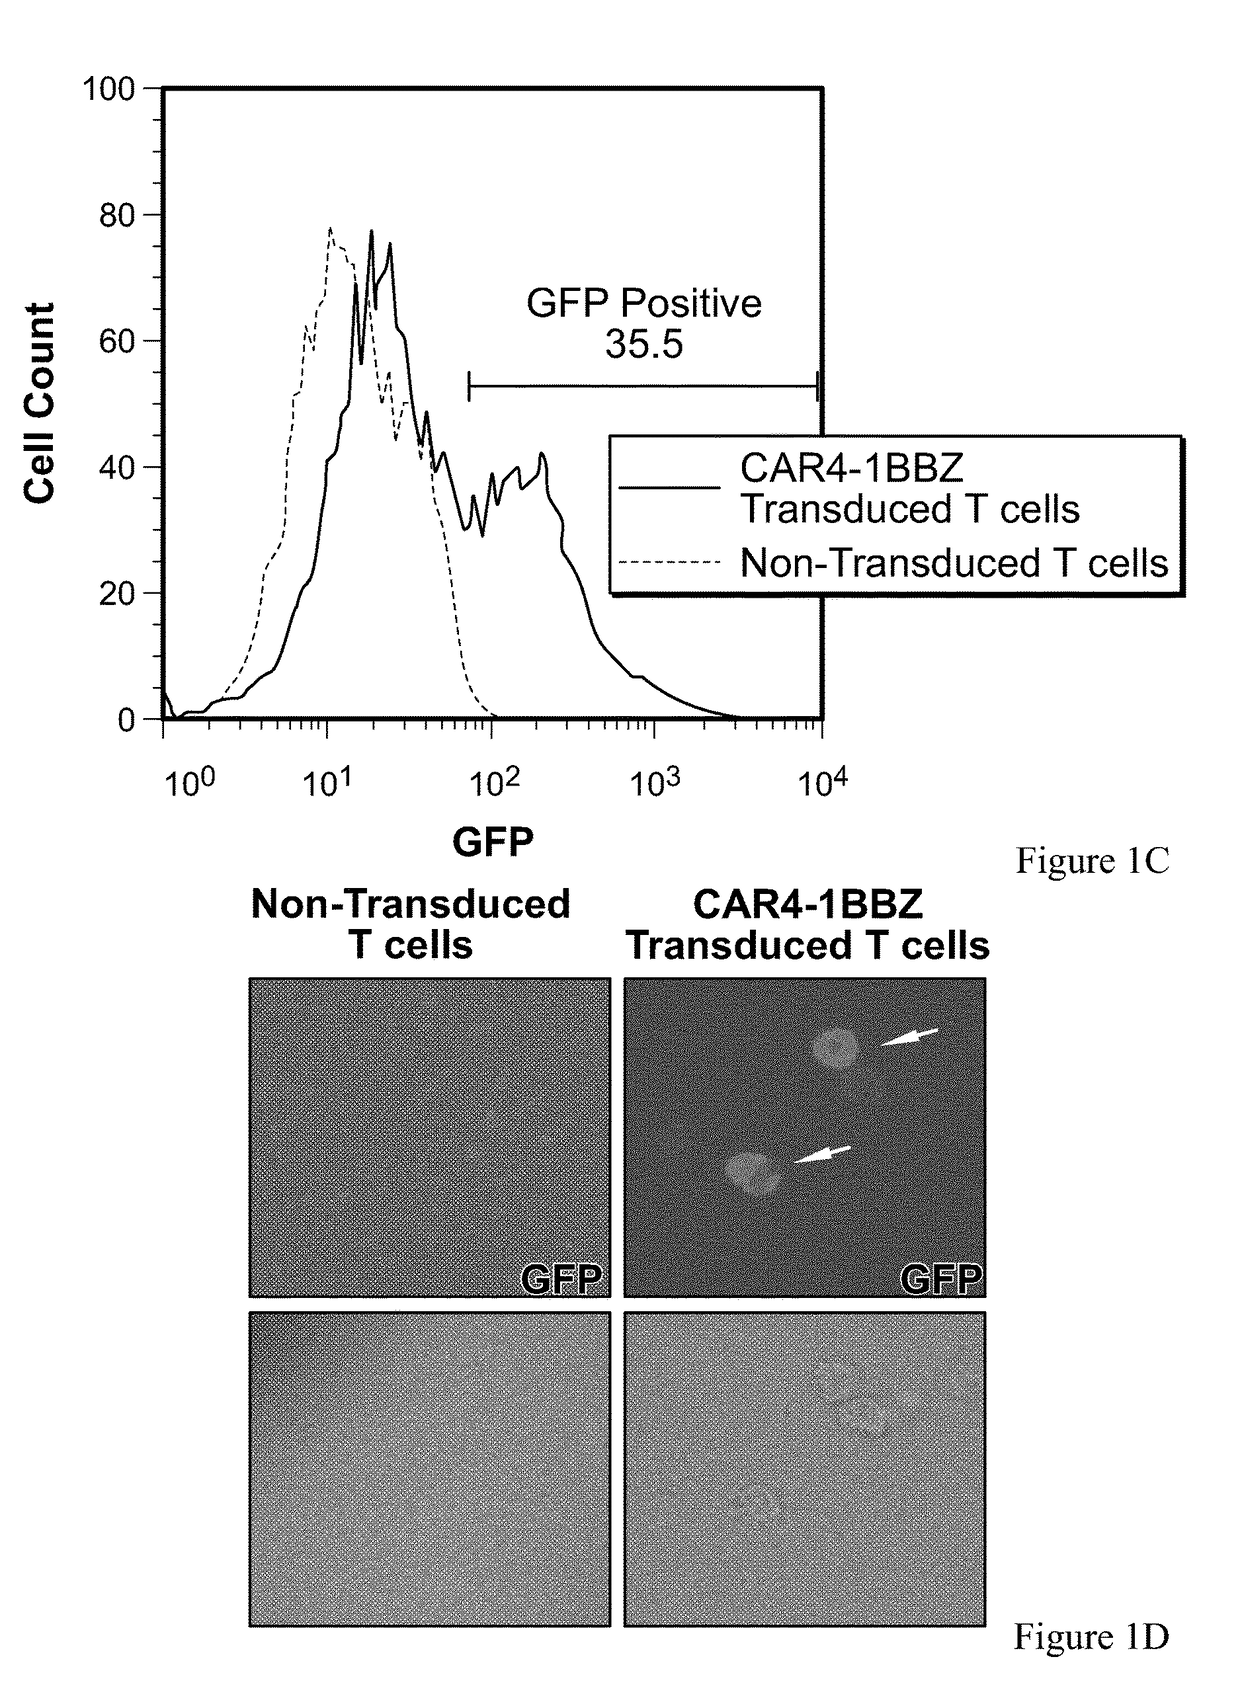 Chimeric antigen receptor-expressing t cells as Anti-cancer therapeutics